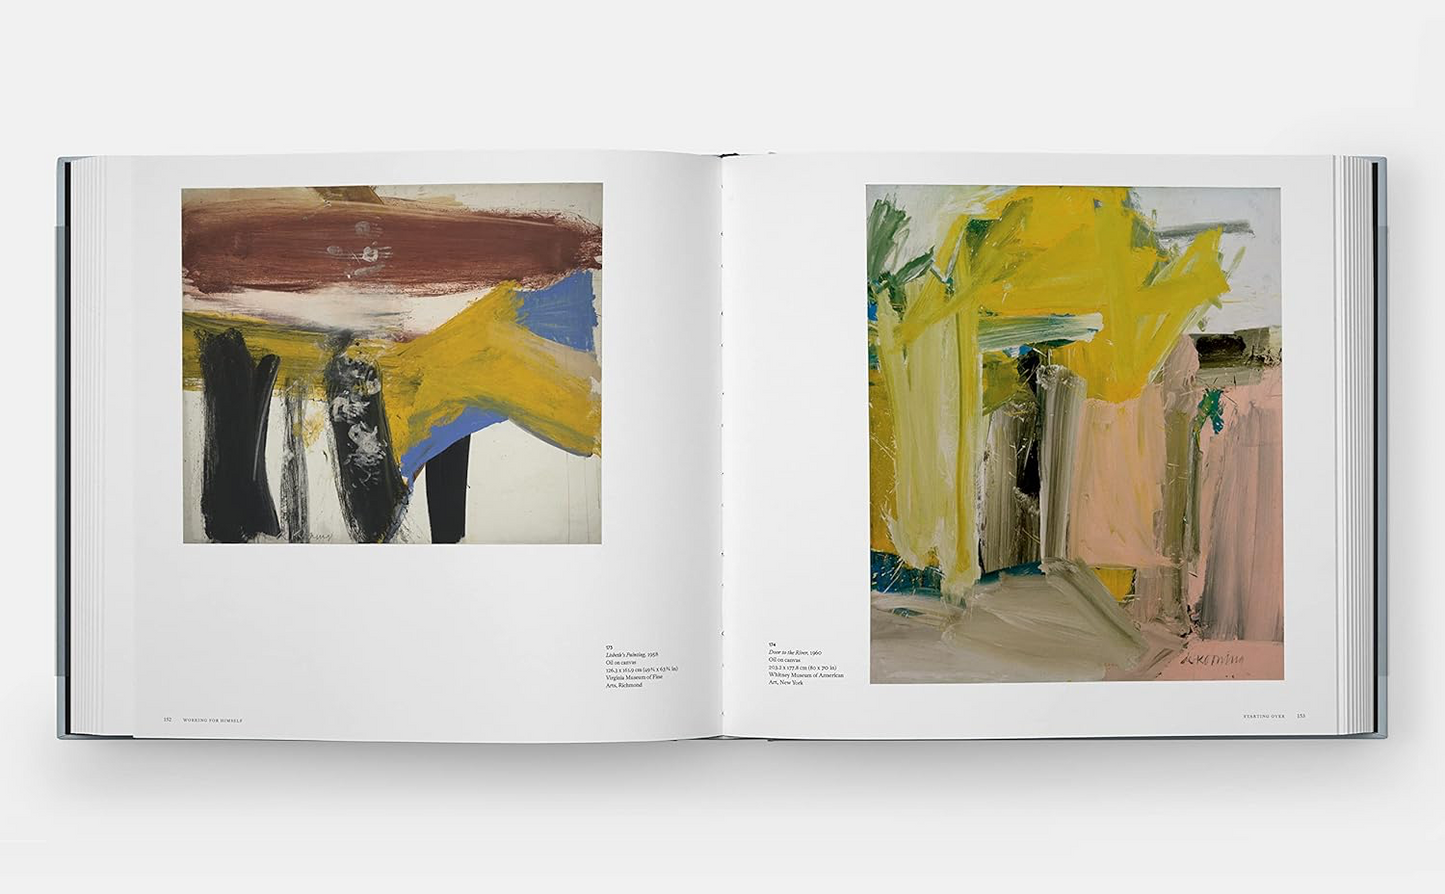 “A Way of Living: The Art of Willem de Kooning” Pages 152 and 153